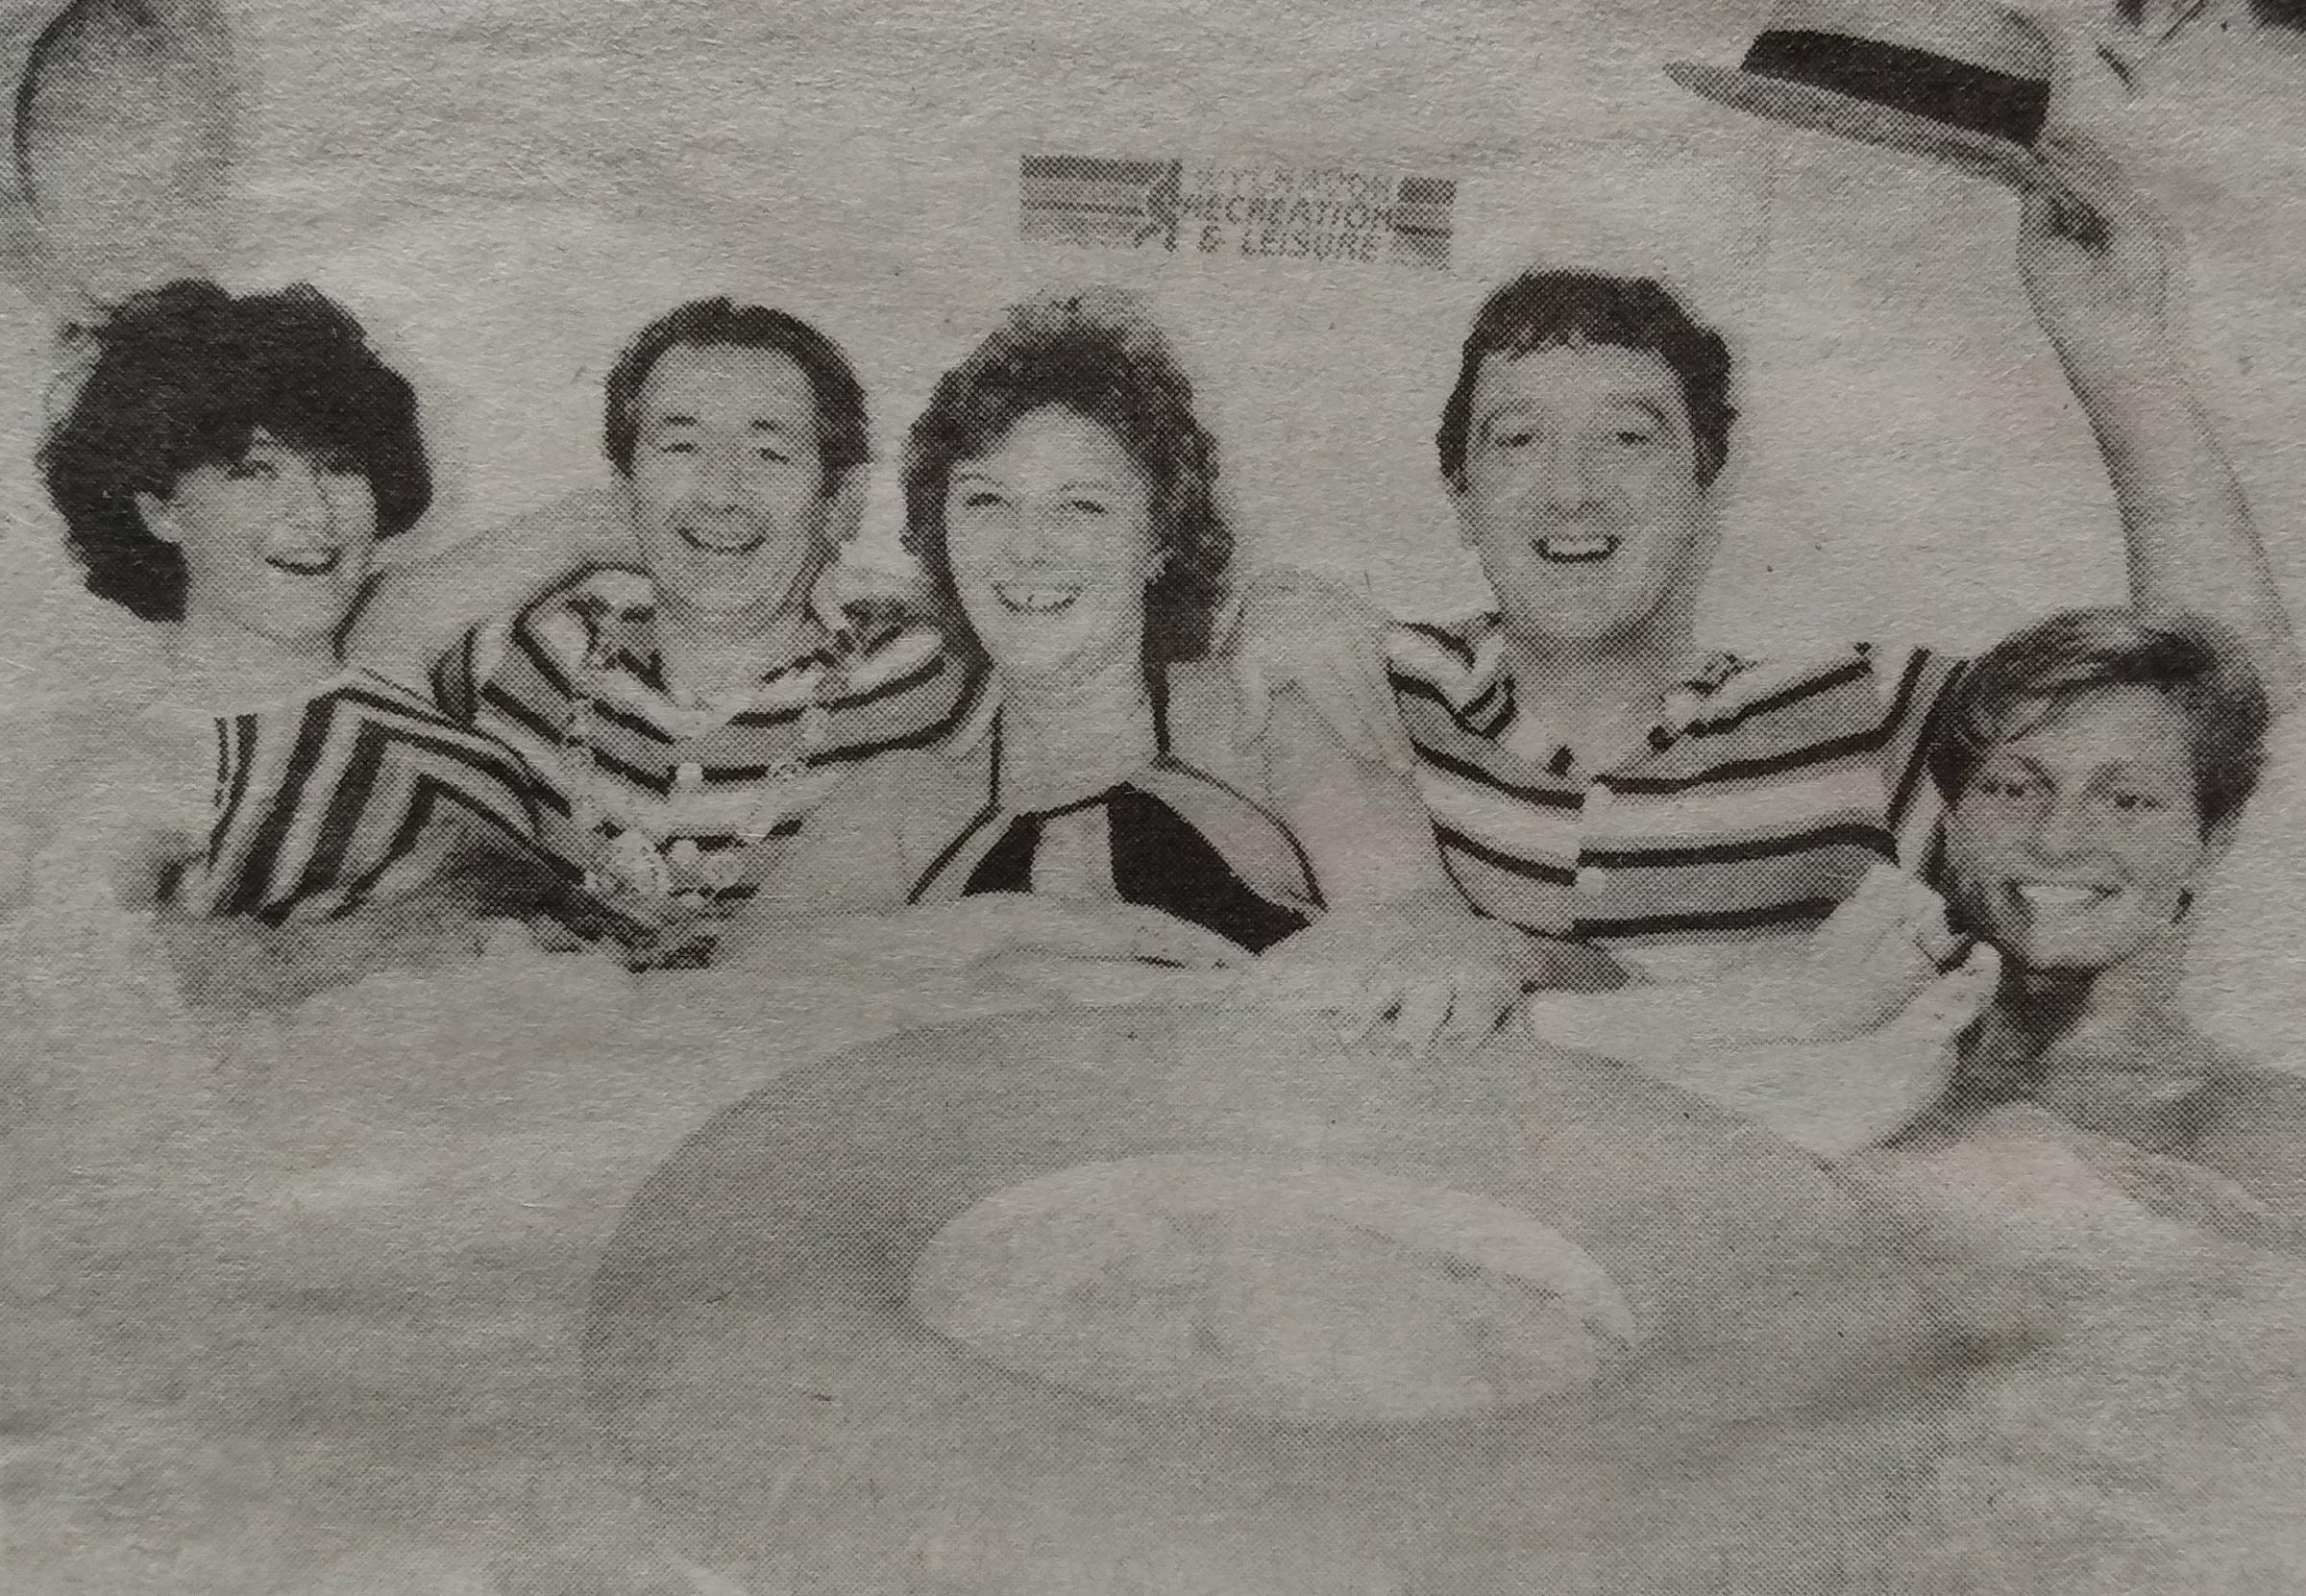 September 1987 and Wychavon councillors tried out the new spa bath at Evesham swimming pool and sports complex. From left, Helen Neilsen; Don Lawley, Wychavon District Council chairman; Angela Tidmarsh; Colin Garrett, council officer; and Kay Summers